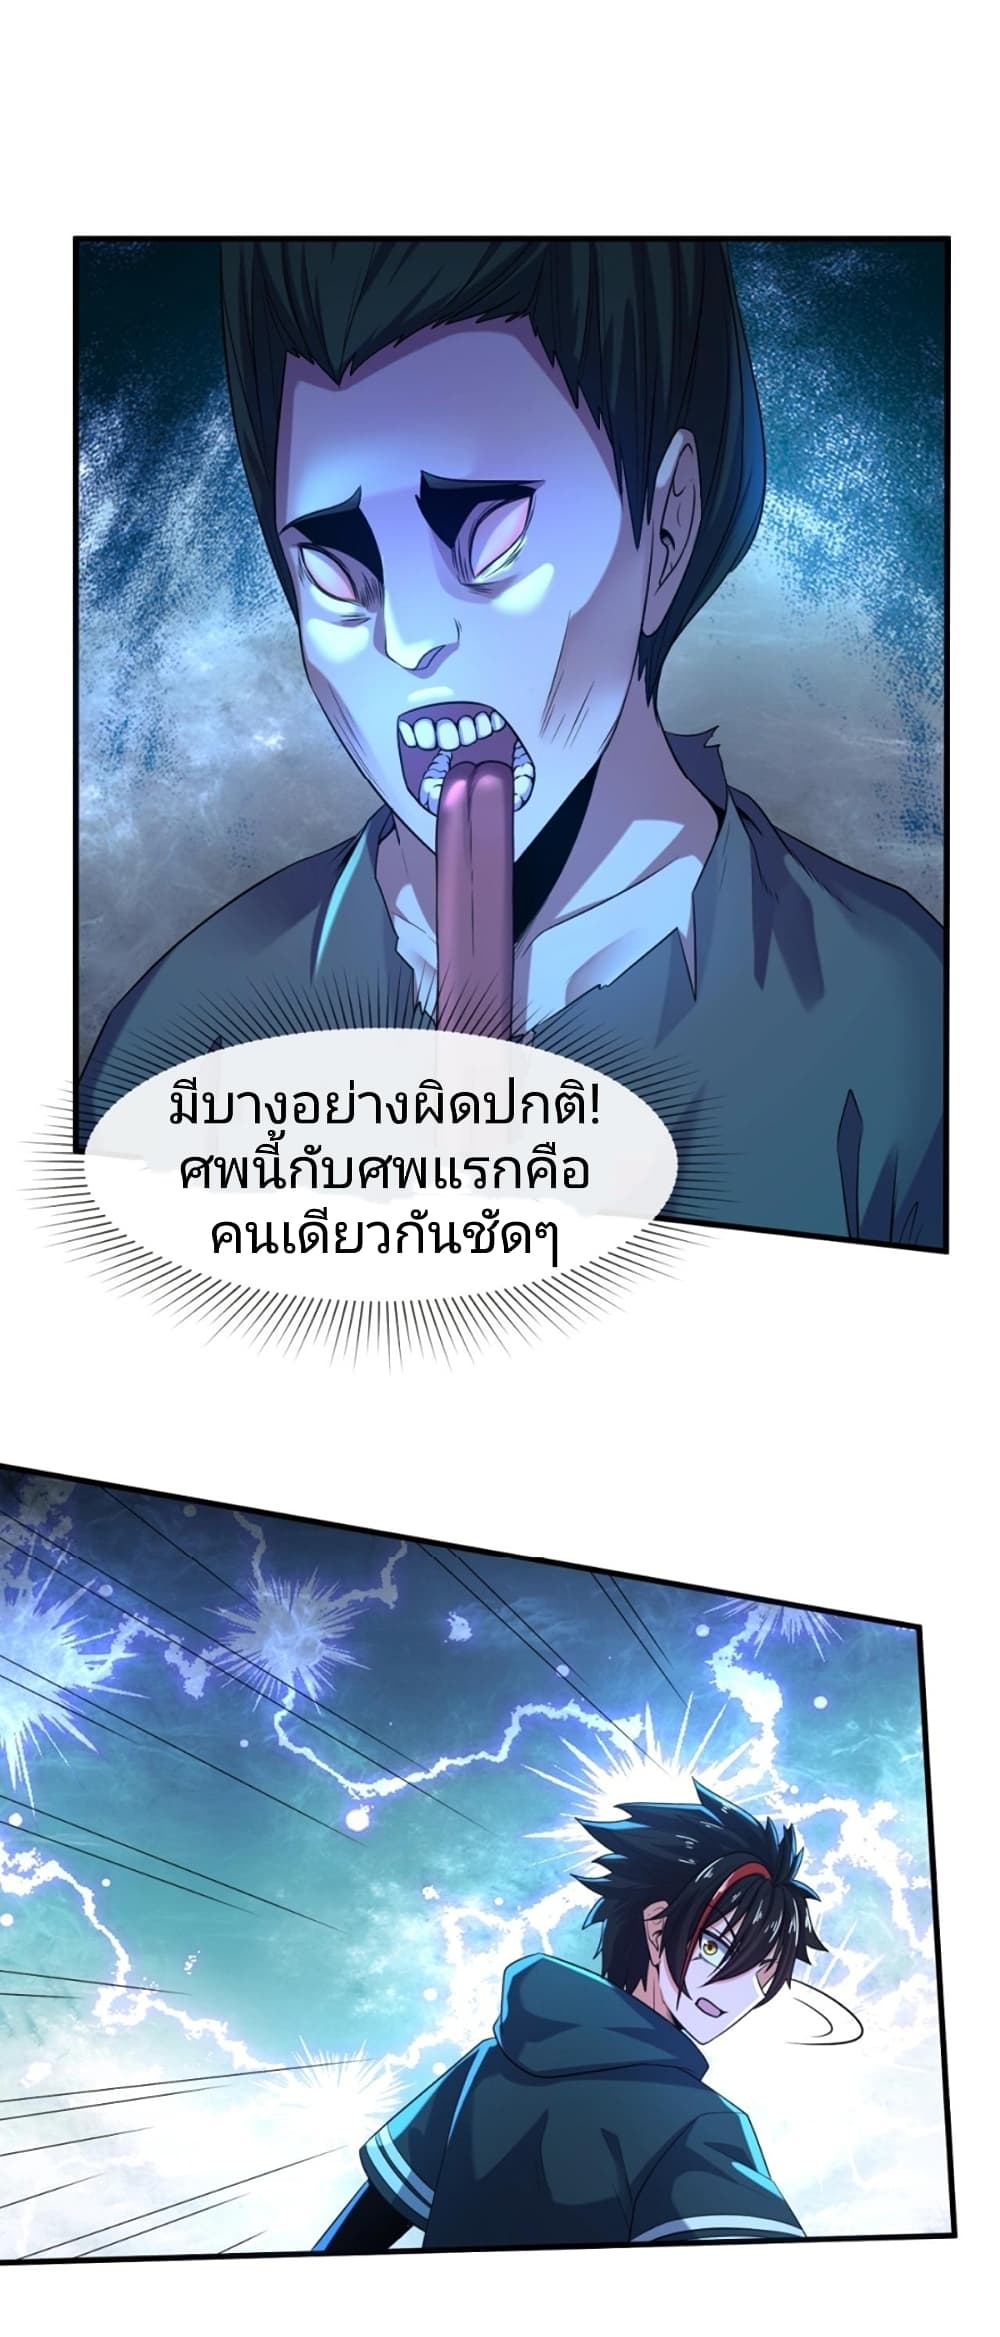 The Age of Ghost Spirits à¸à¸­à¸à¸à¸µà¹ 8 (35)